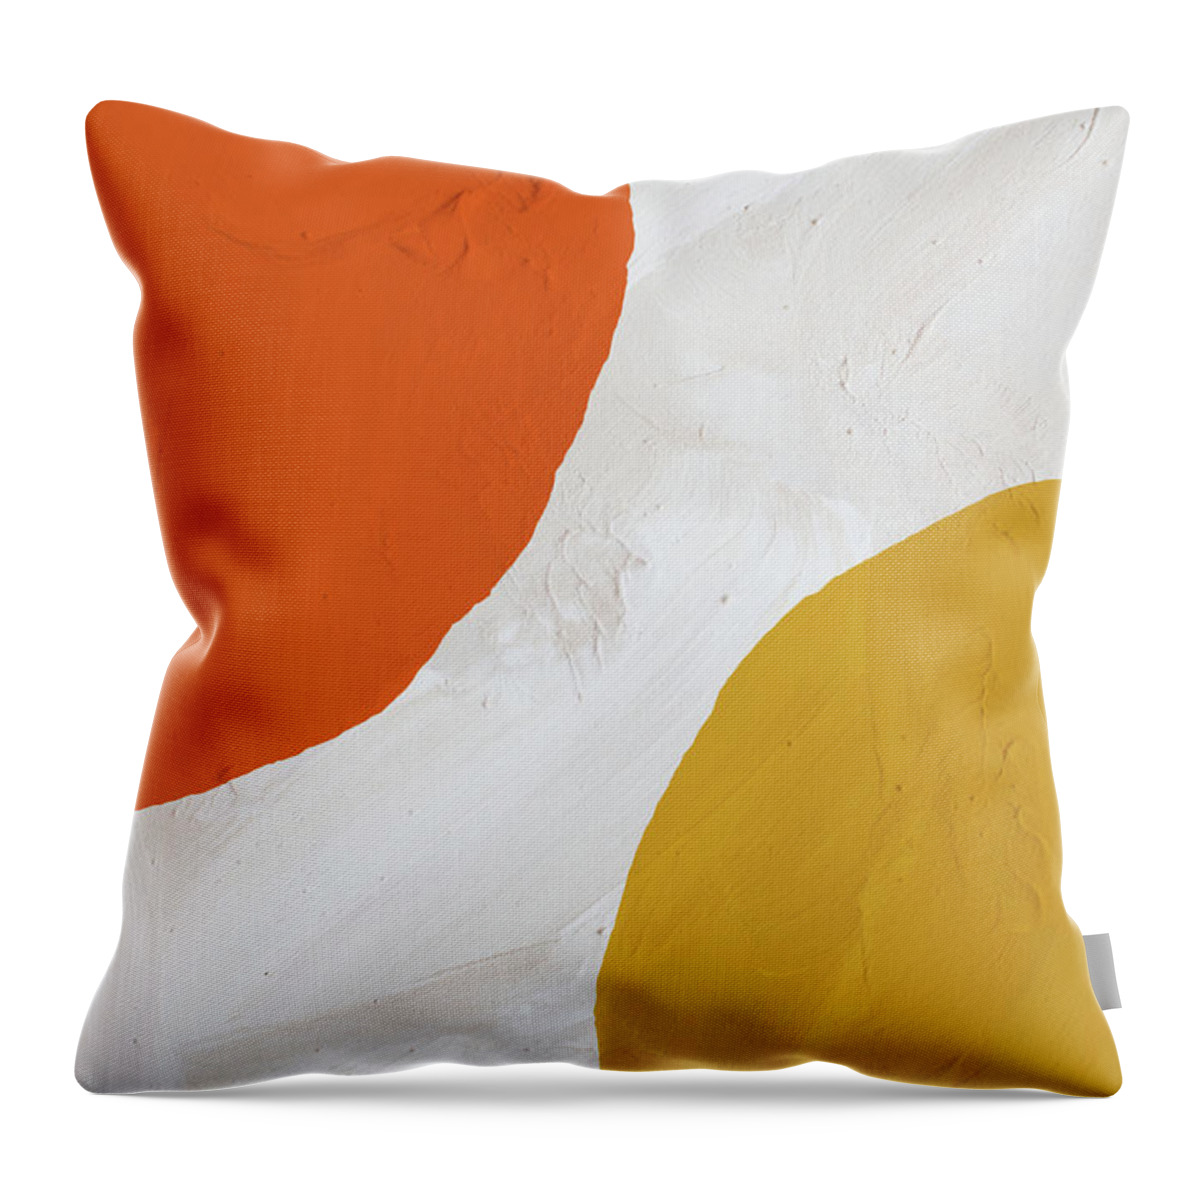 Abstract Painting Throw Pillow featuring the painting Orange, Yellow And White by Abstract Art